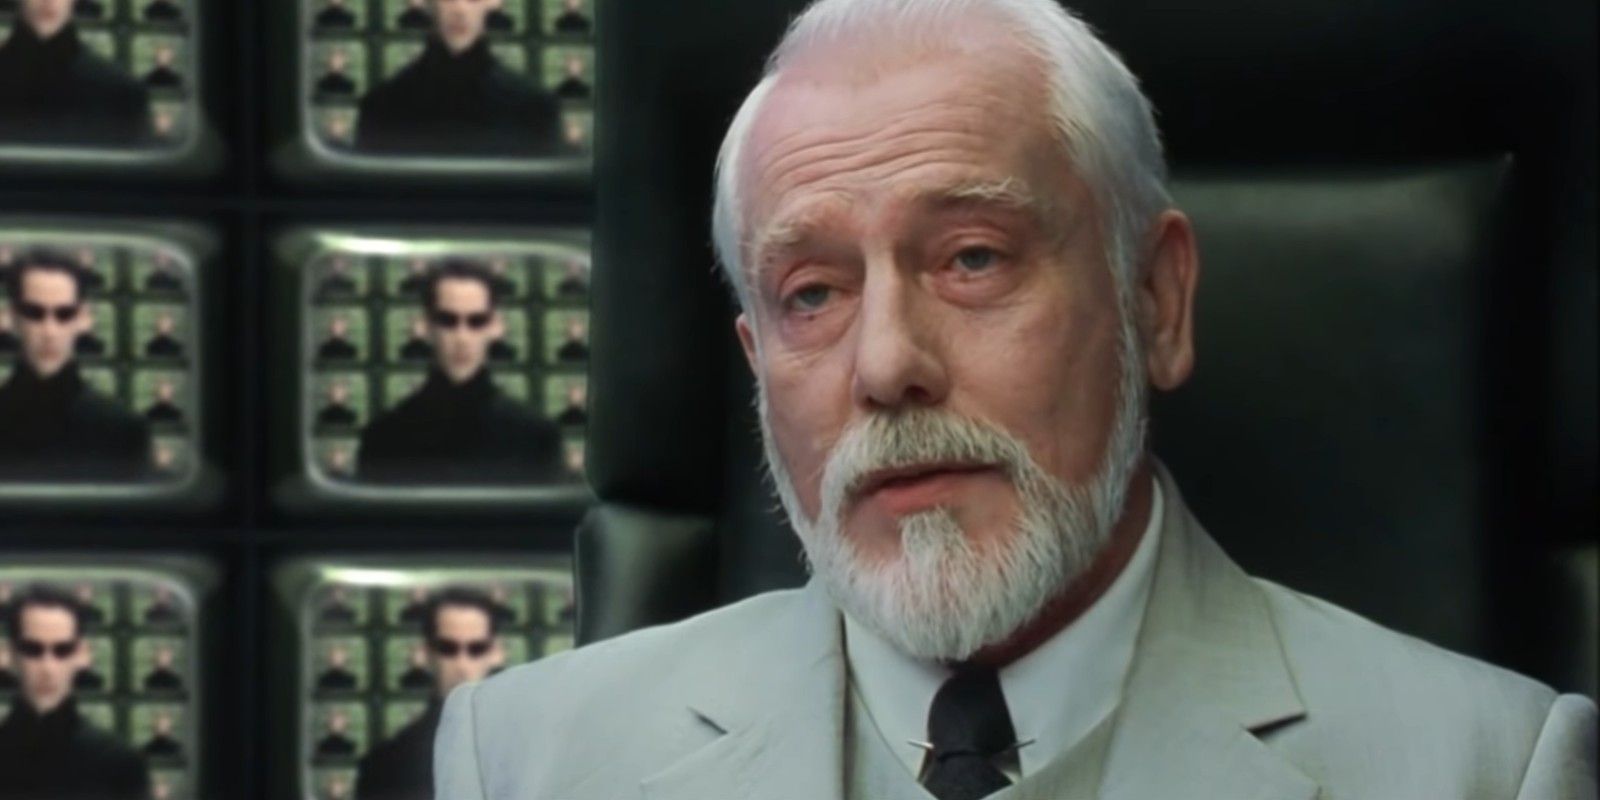 The Architect speaking with Neo in The Matrix Reloaded